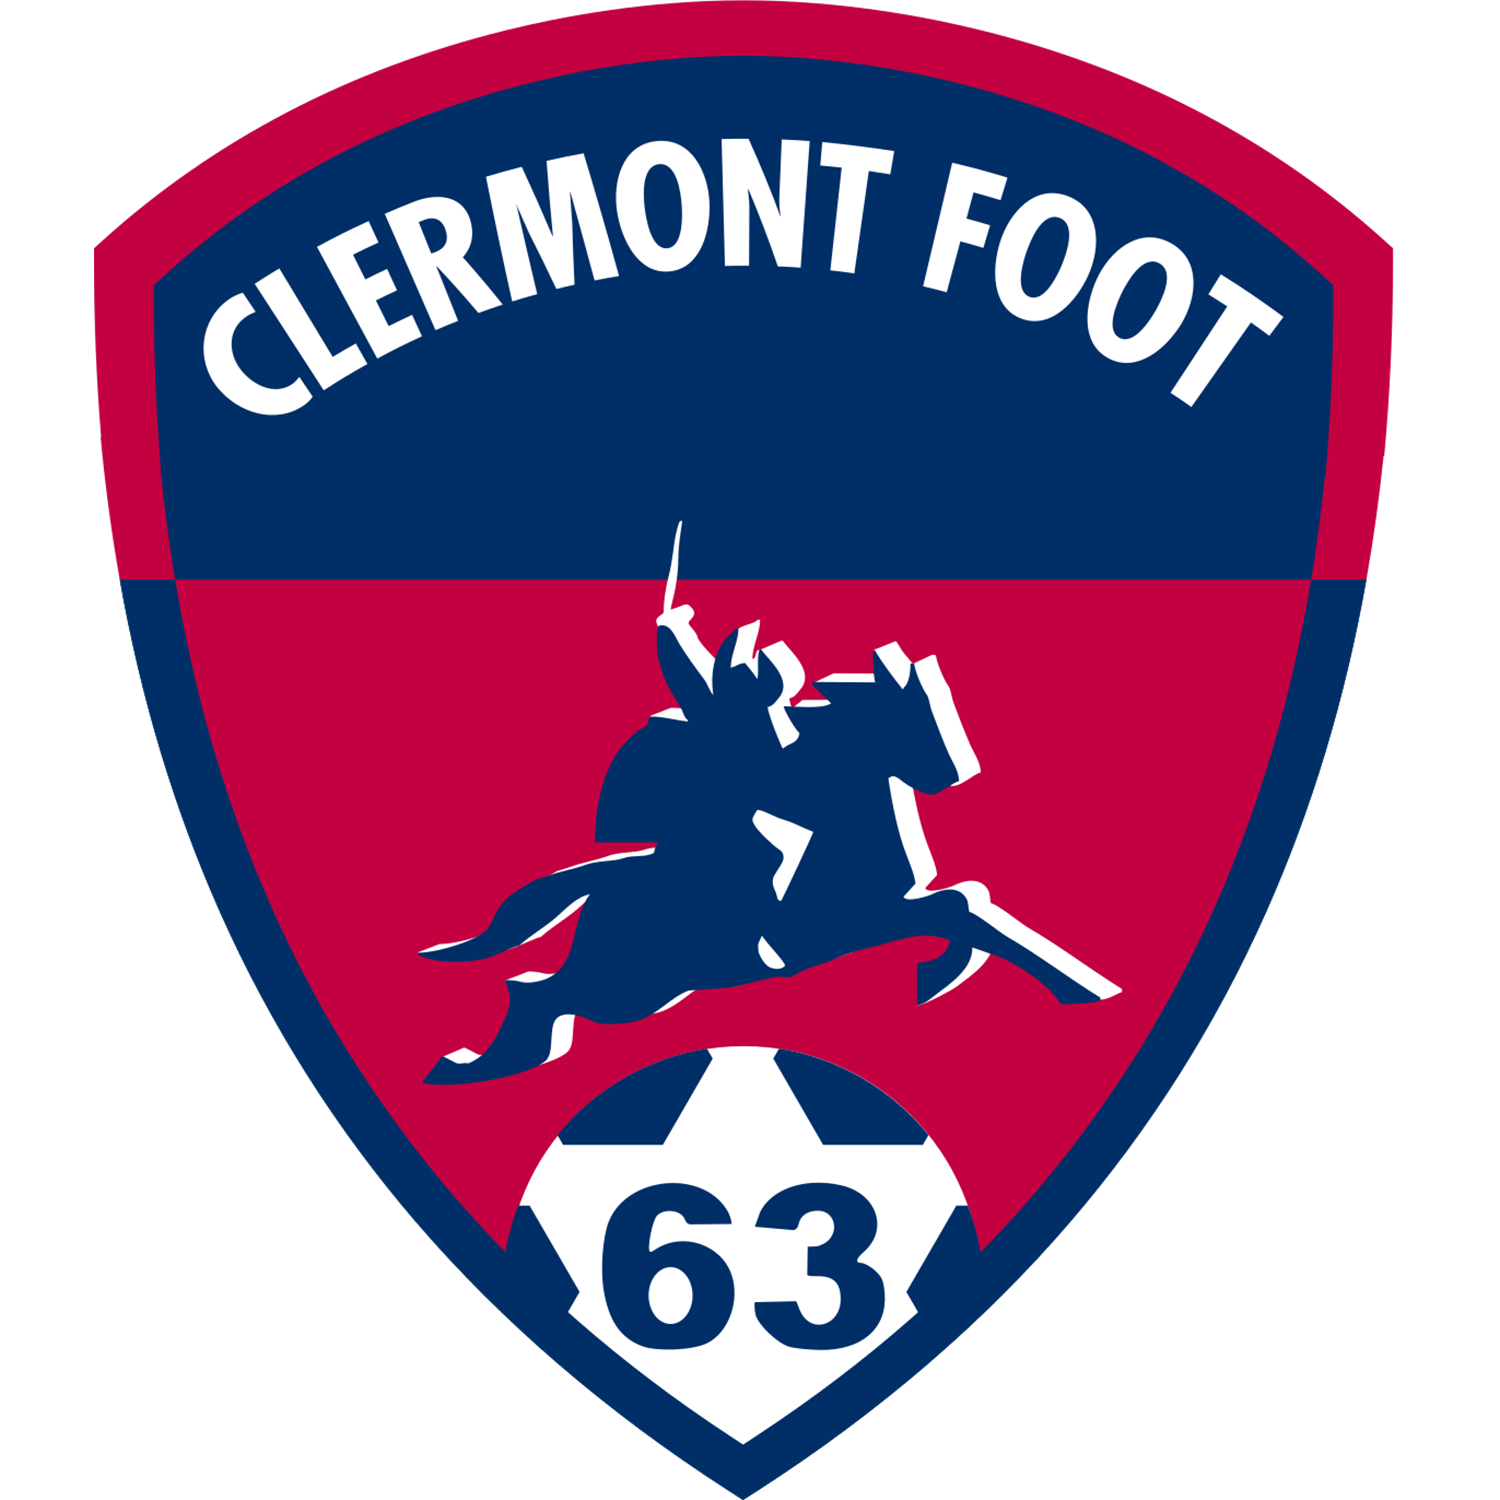 Clermont Foot 63 - U17 Nationaux • Actufoot